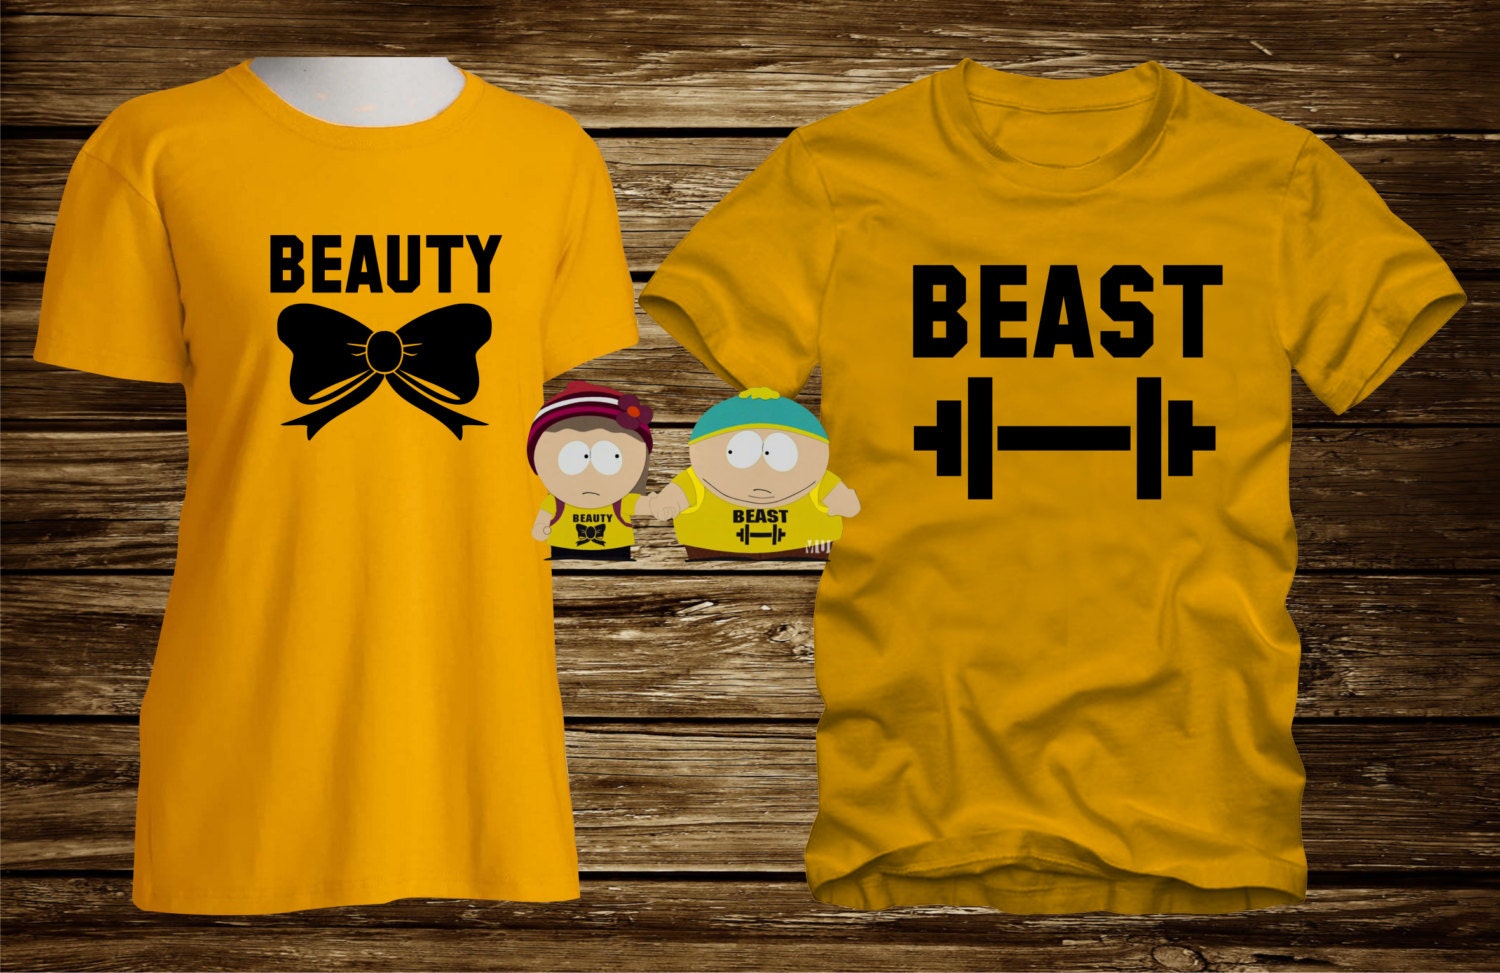 Matching T-shirts BEAUTY / BEAST men's and Women's Sizes Available